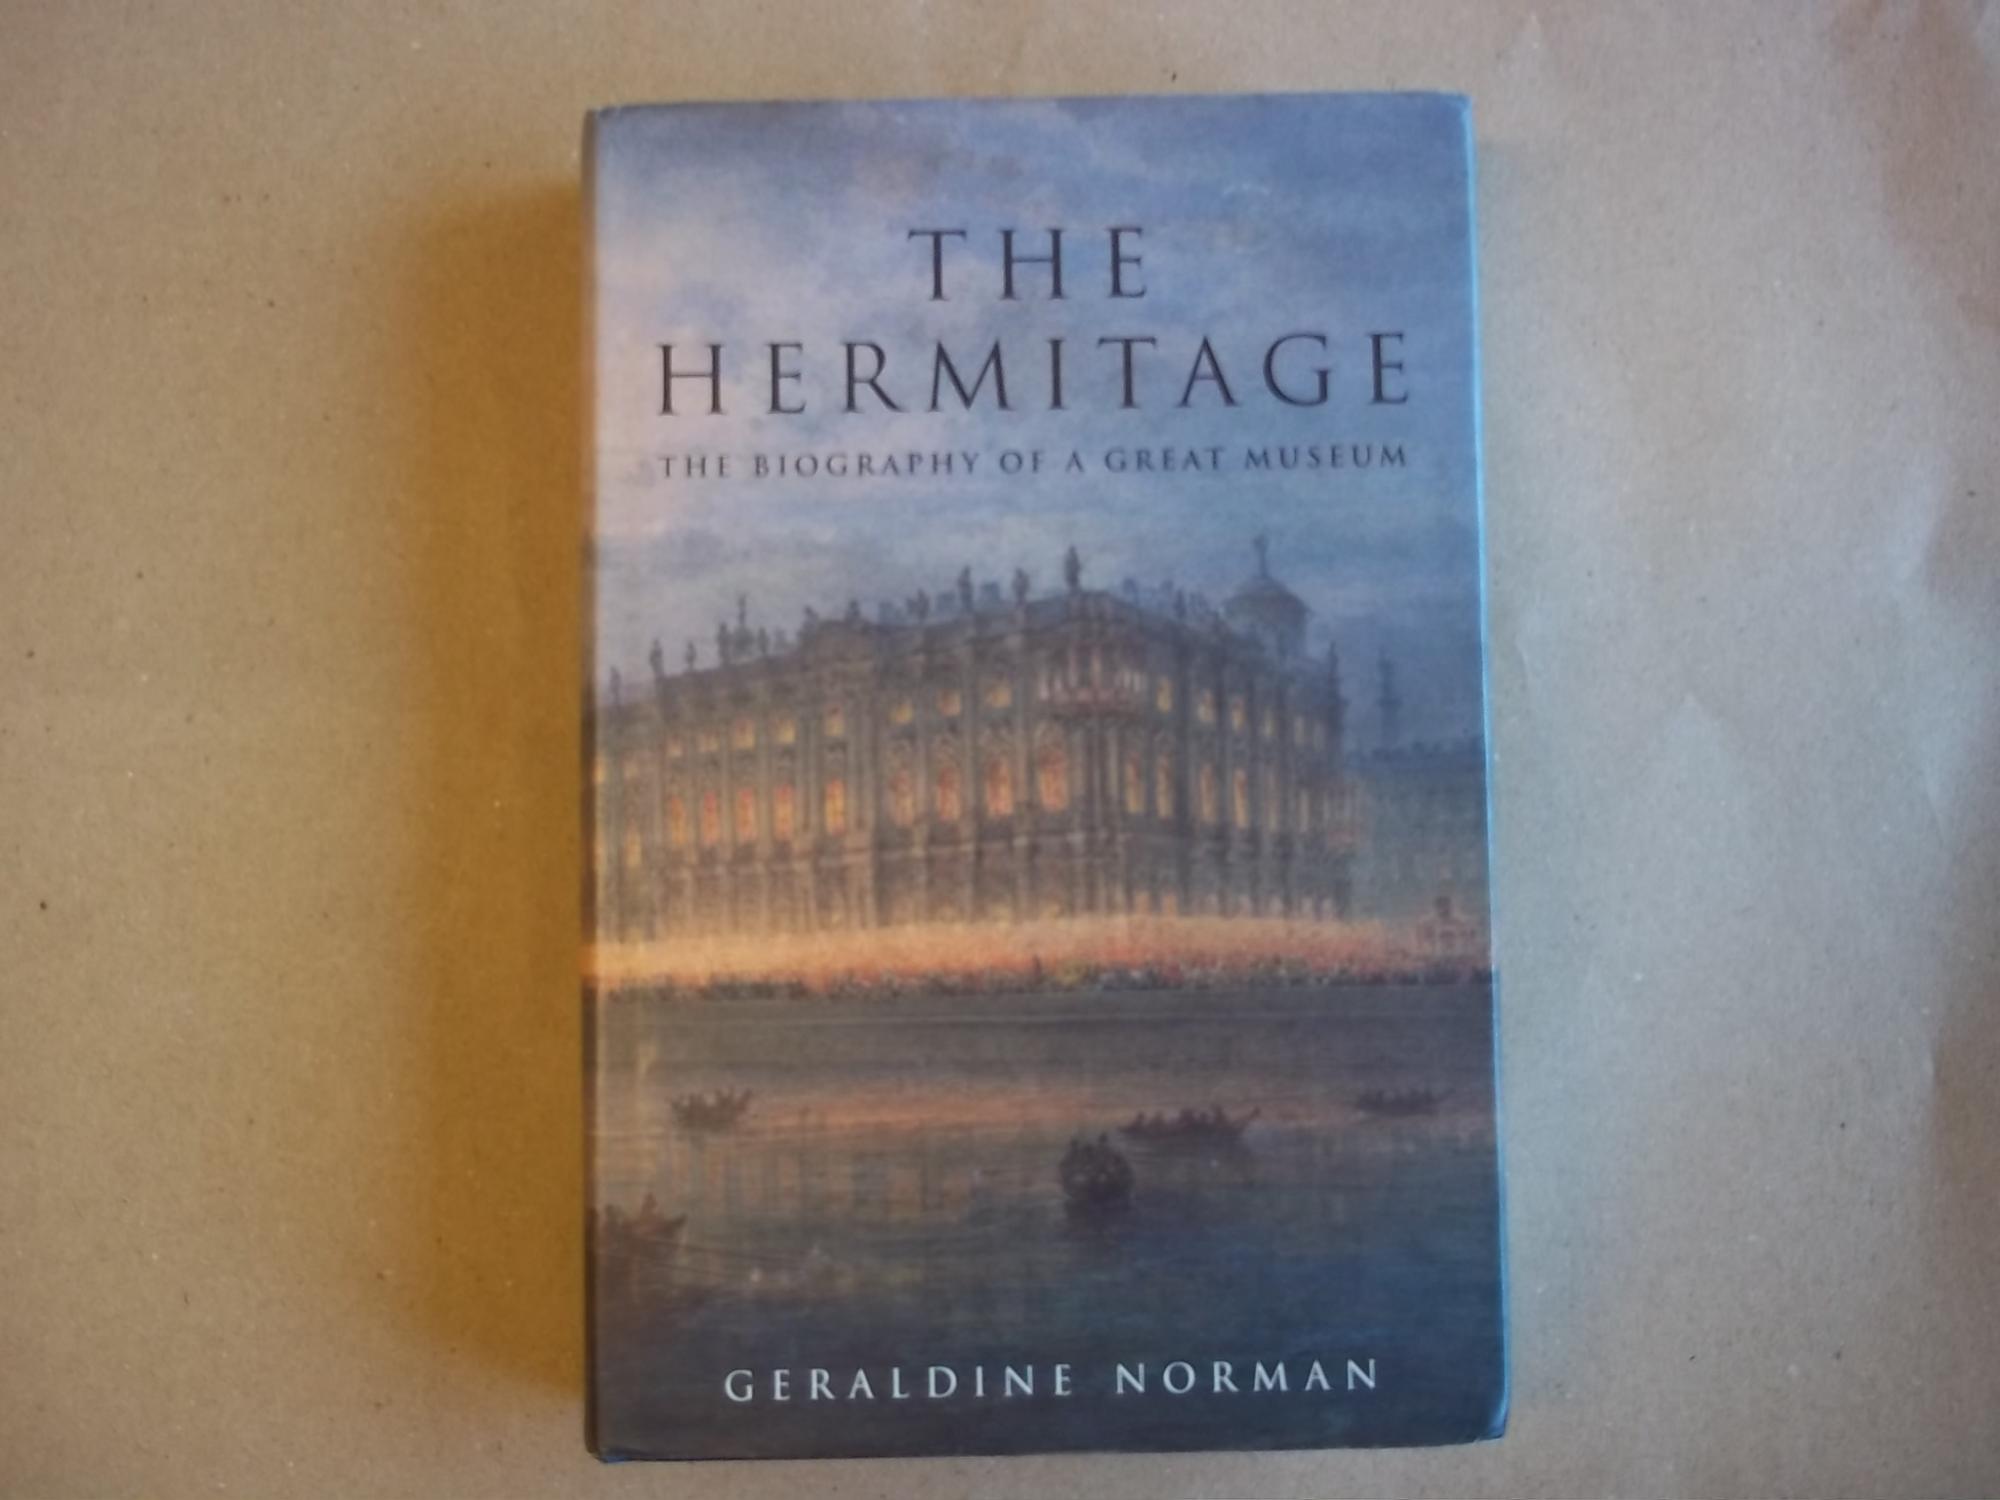 The Hermitage: The Biography of a Great Museum - Geraldine Norman